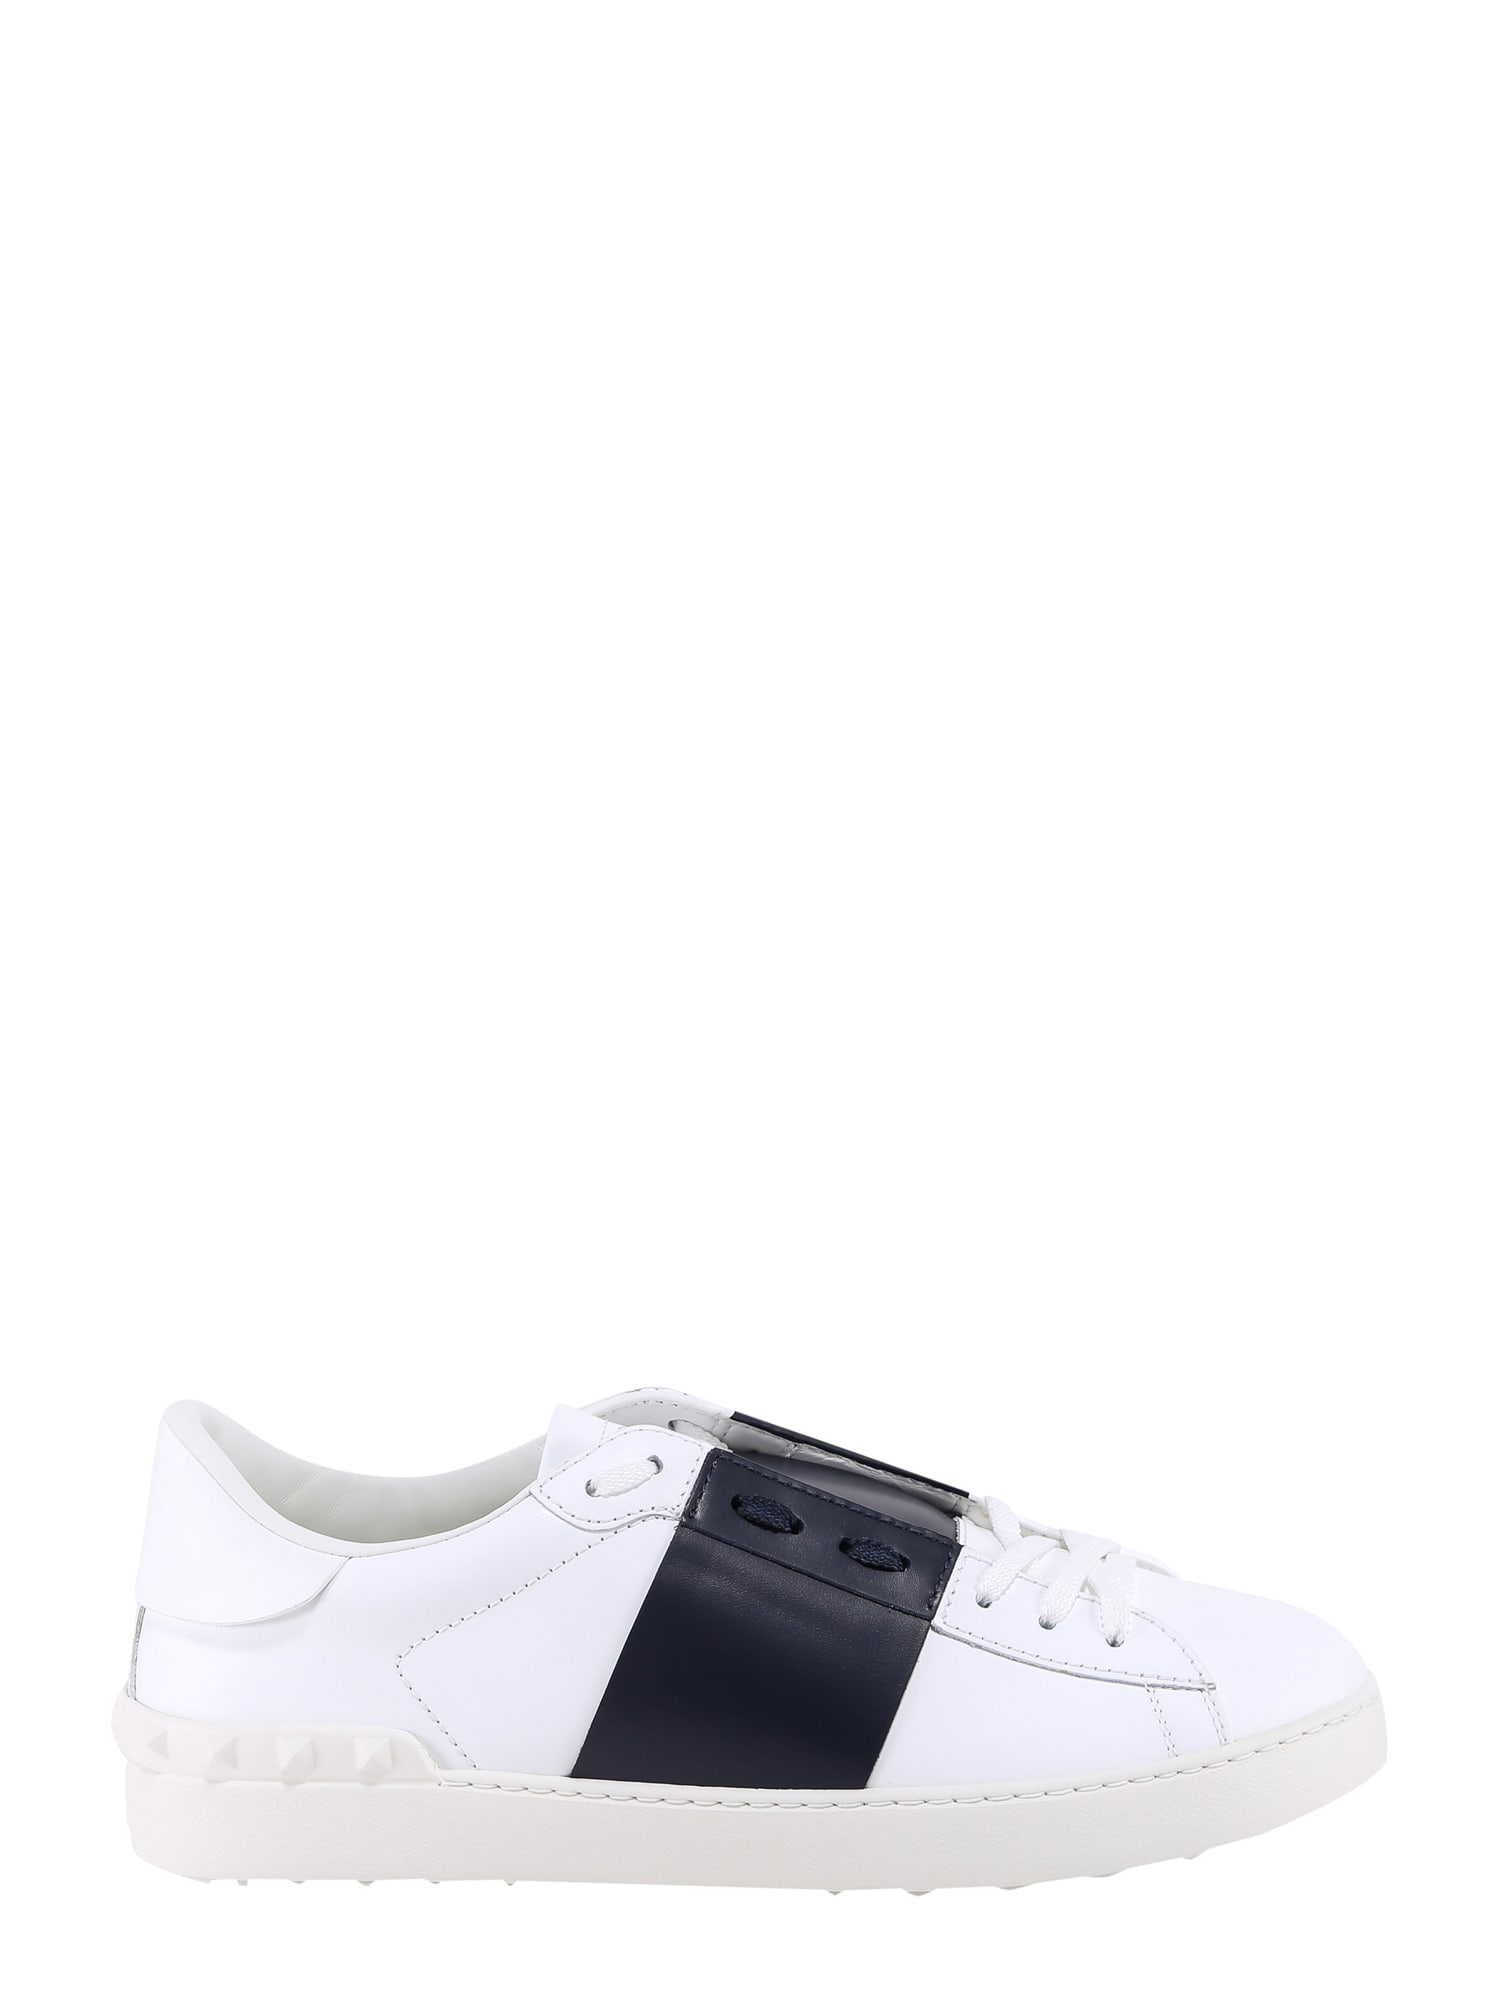 VALENTINO Leathers OPEN SNEAKERS